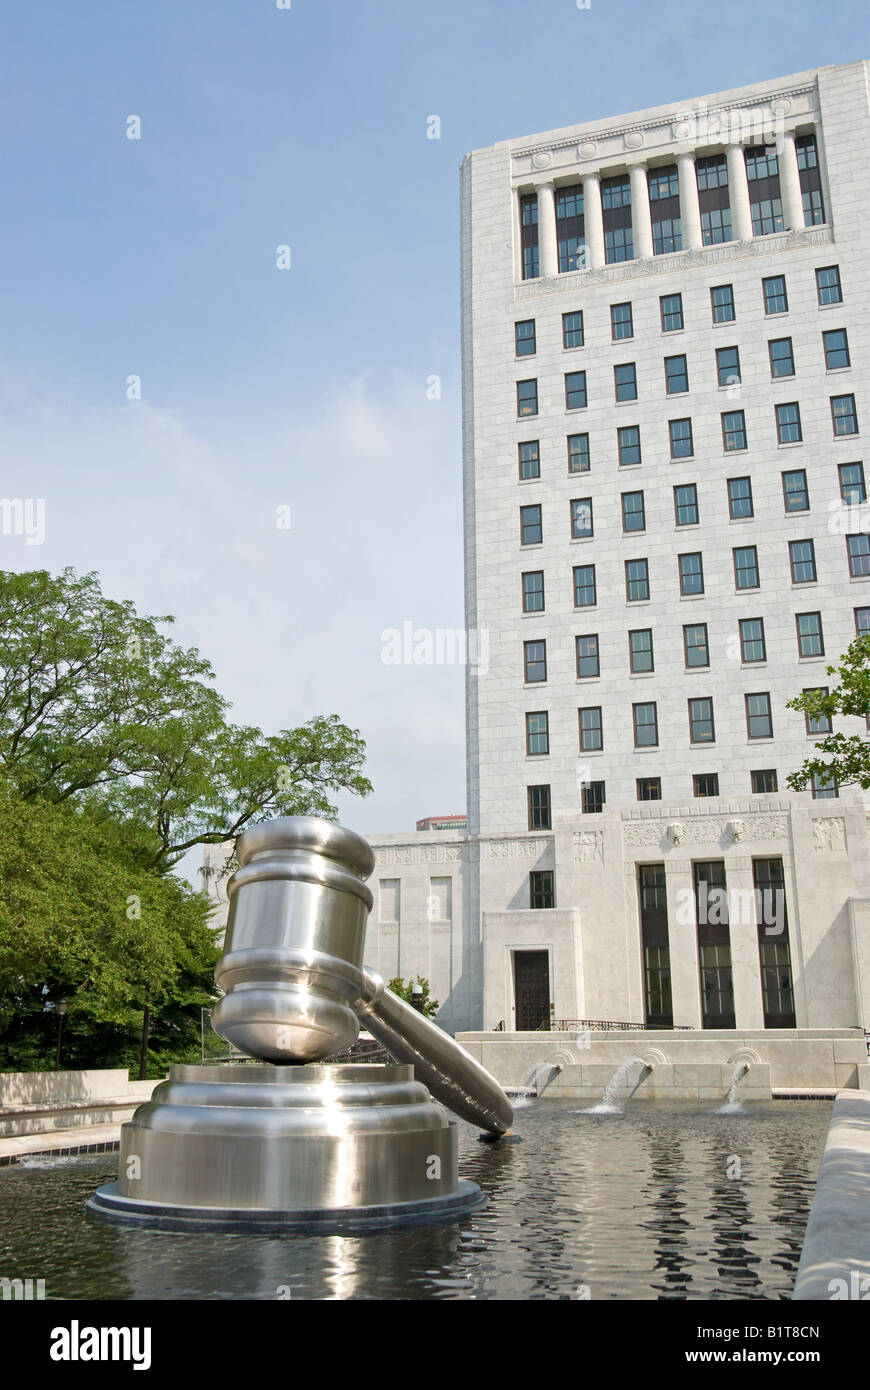 COLUMBUS, Ohio - Courthouse building in Columbus Ohio with a large statue of a gavel in the the foreground in the fountain. Stock Photo